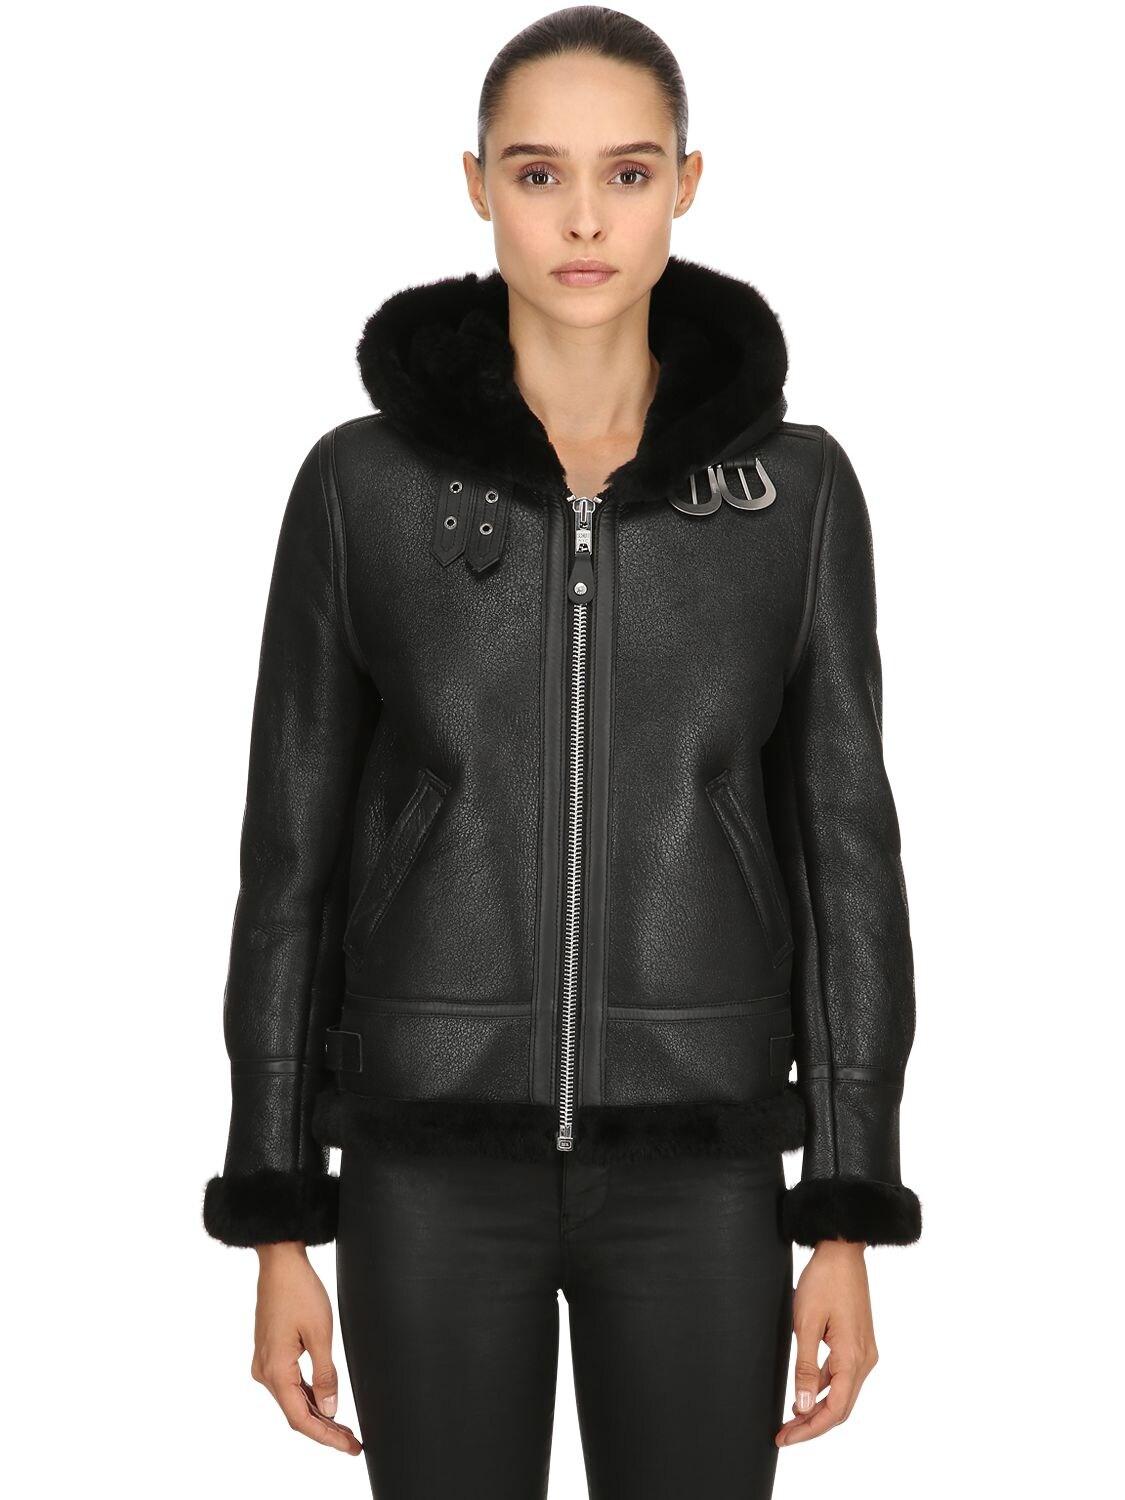 Schott Nyc Lcw 1257 Hooded Leather Aviator Jacket in Black - Lyst